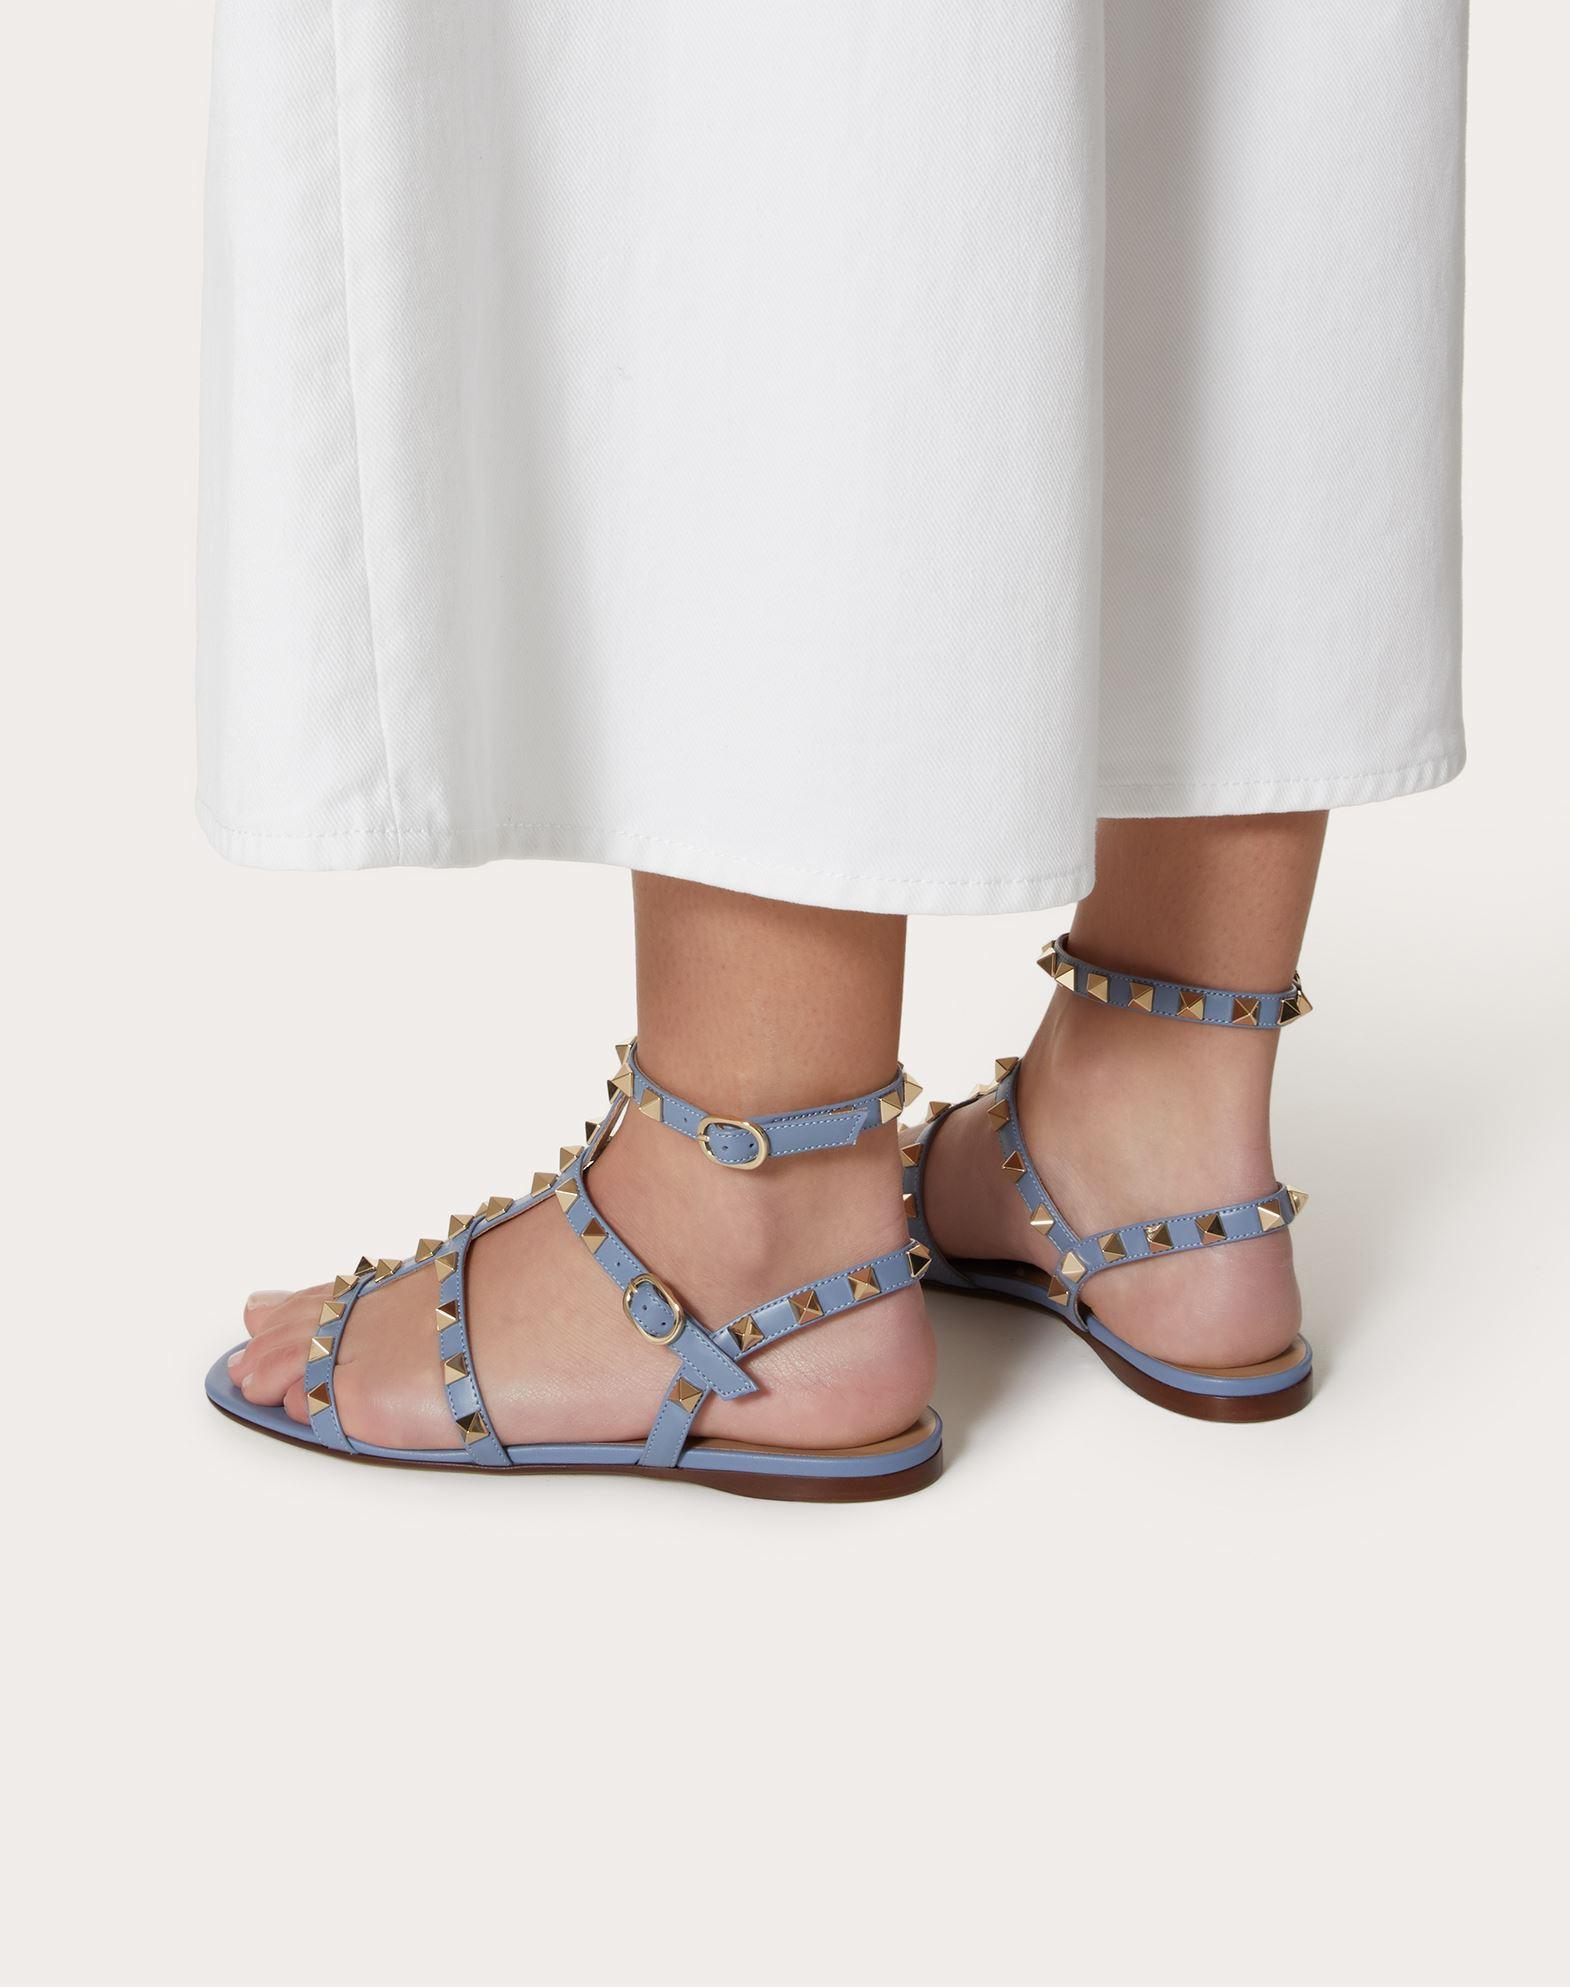 Valentino Rockstud Flat Sandal With Straps in Blue | Lyst